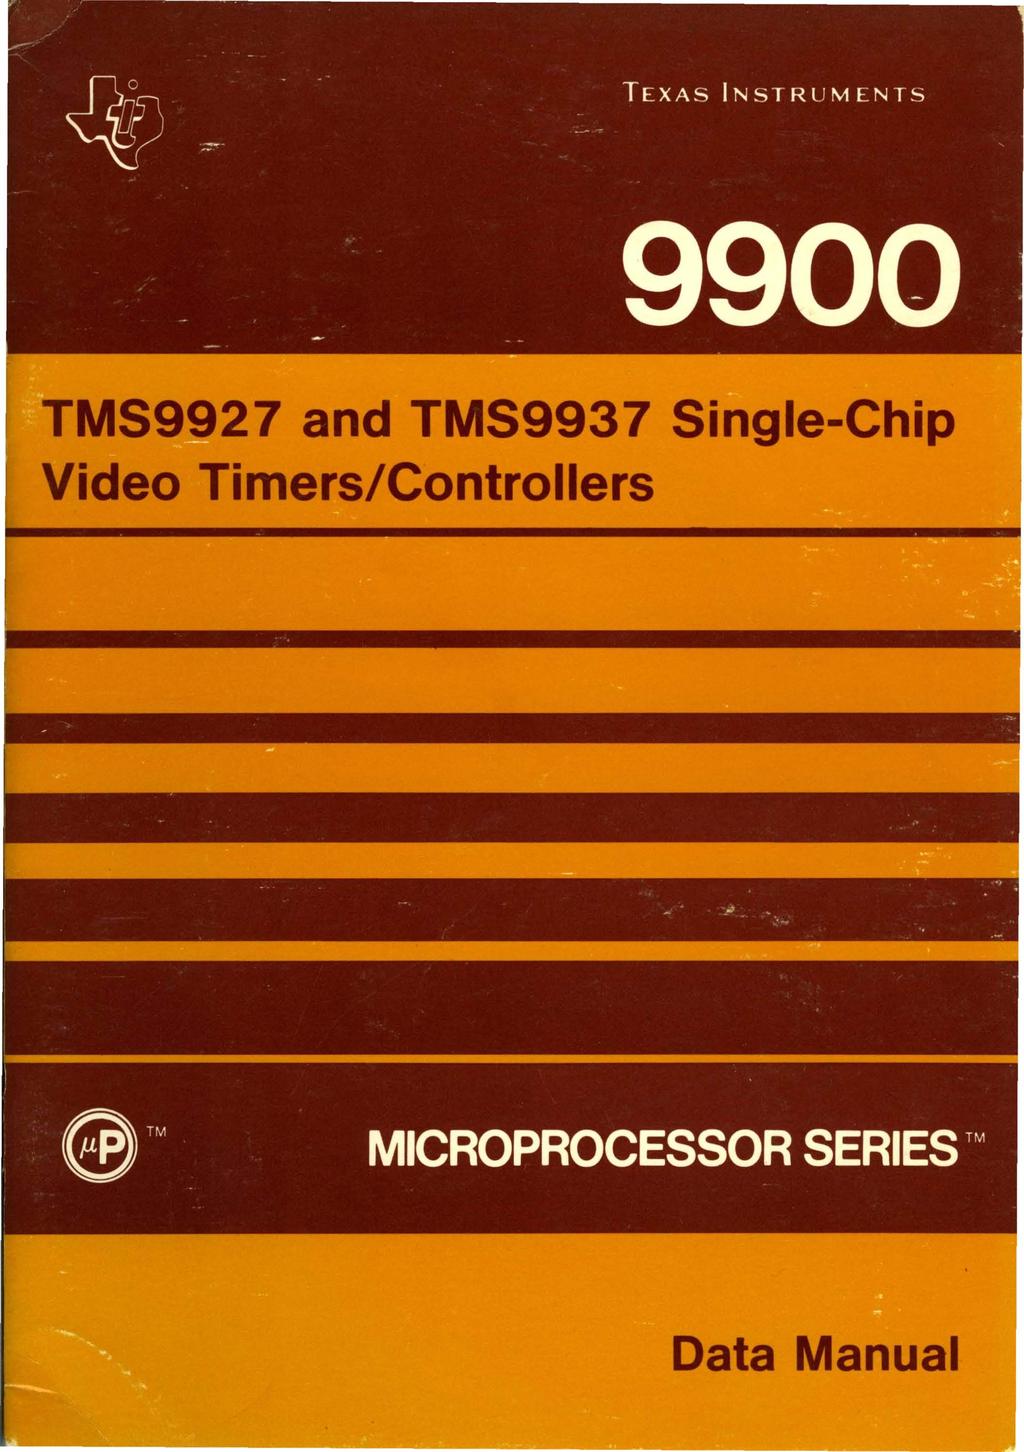 TMS9927 and TMS9937 Single-Chip